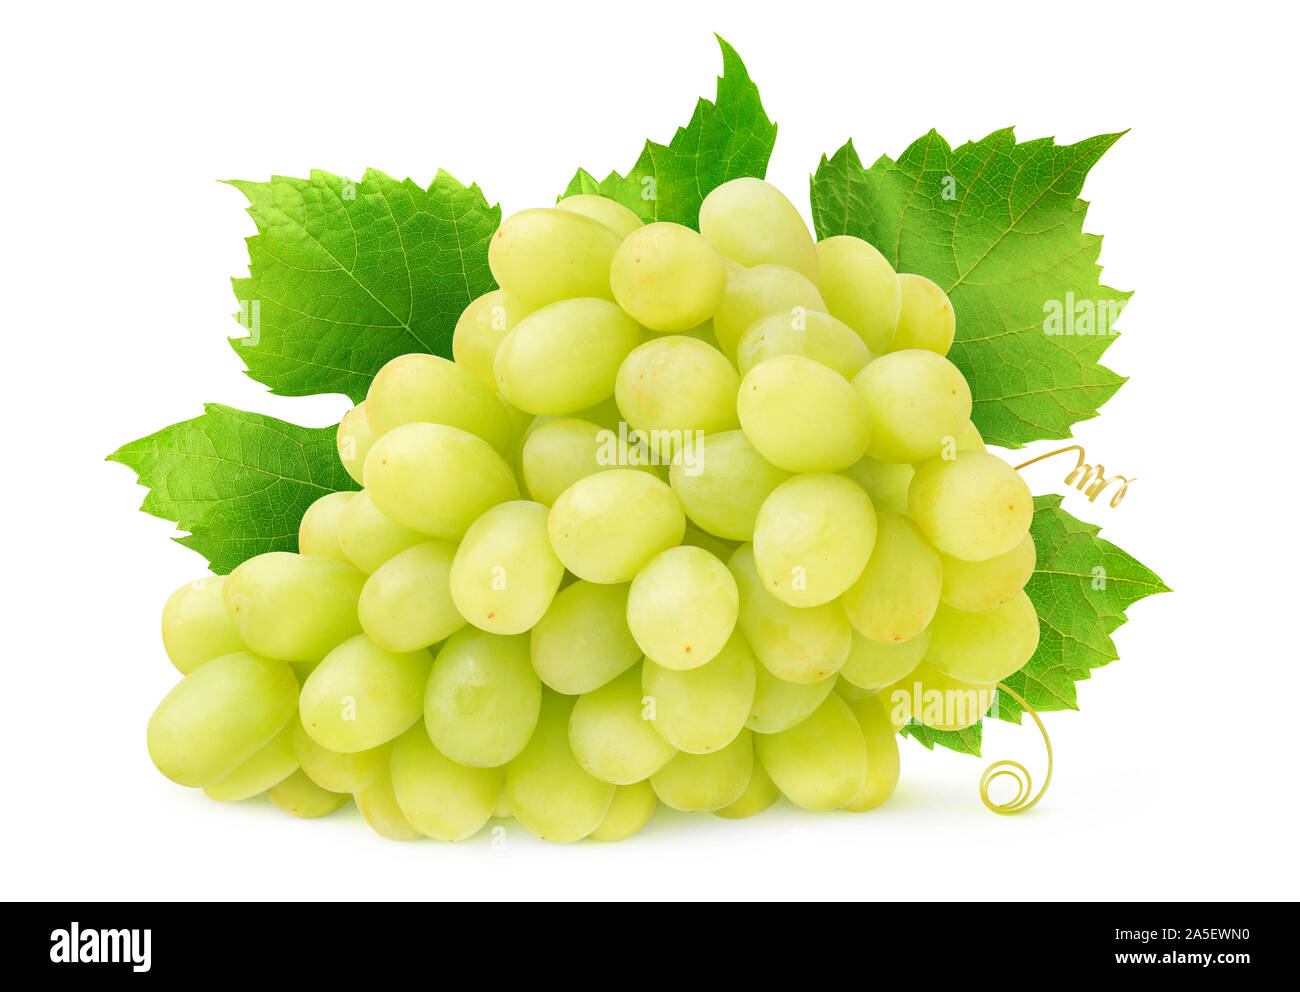 https://c8.alamy.com/comp/2A5EWN0/isolated-white-grape-bunch-of-thompson-seedless-grapes-with-leaves-and-tendrils-isolated-on-white-background-with-clipping-path-2A5EWN0.jpg